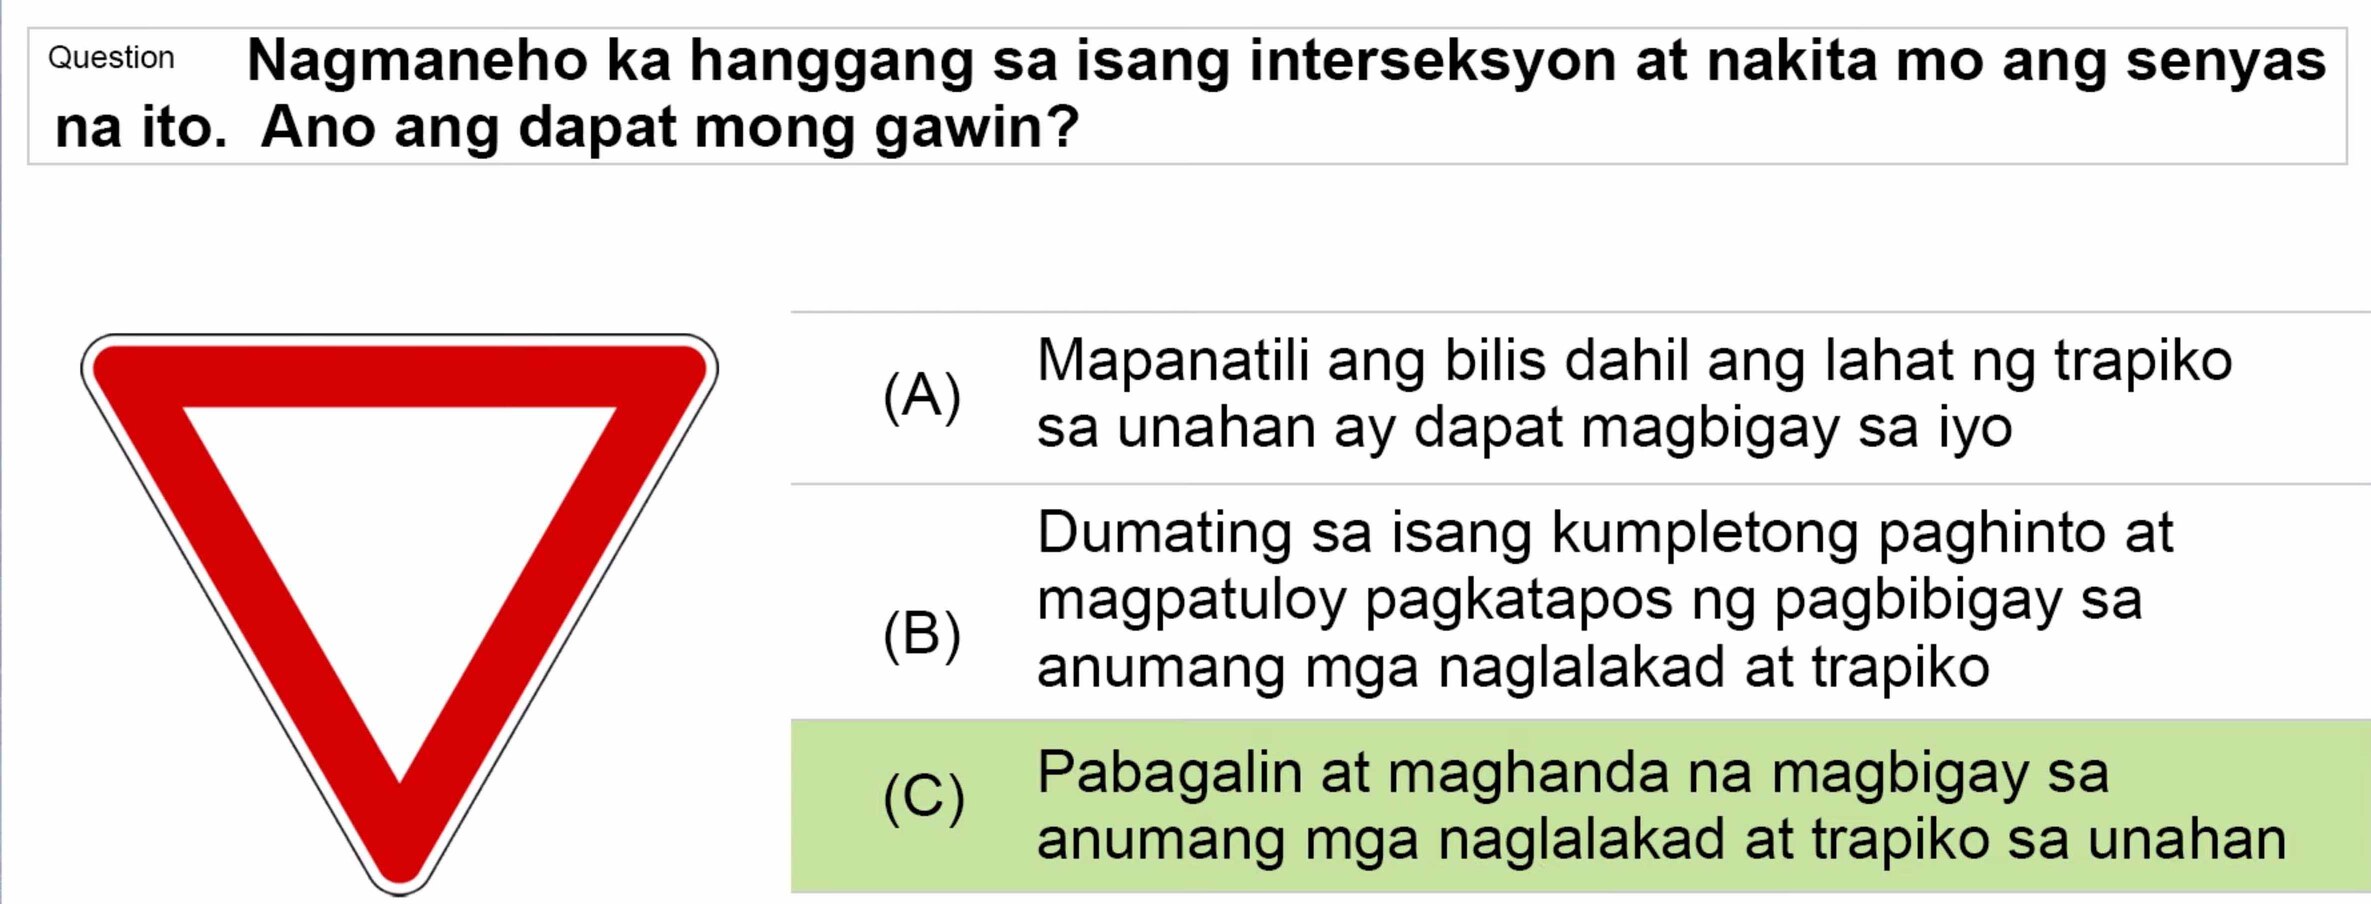 LTO Tagalog non professional exam reviewer motorcycle 1 (59)